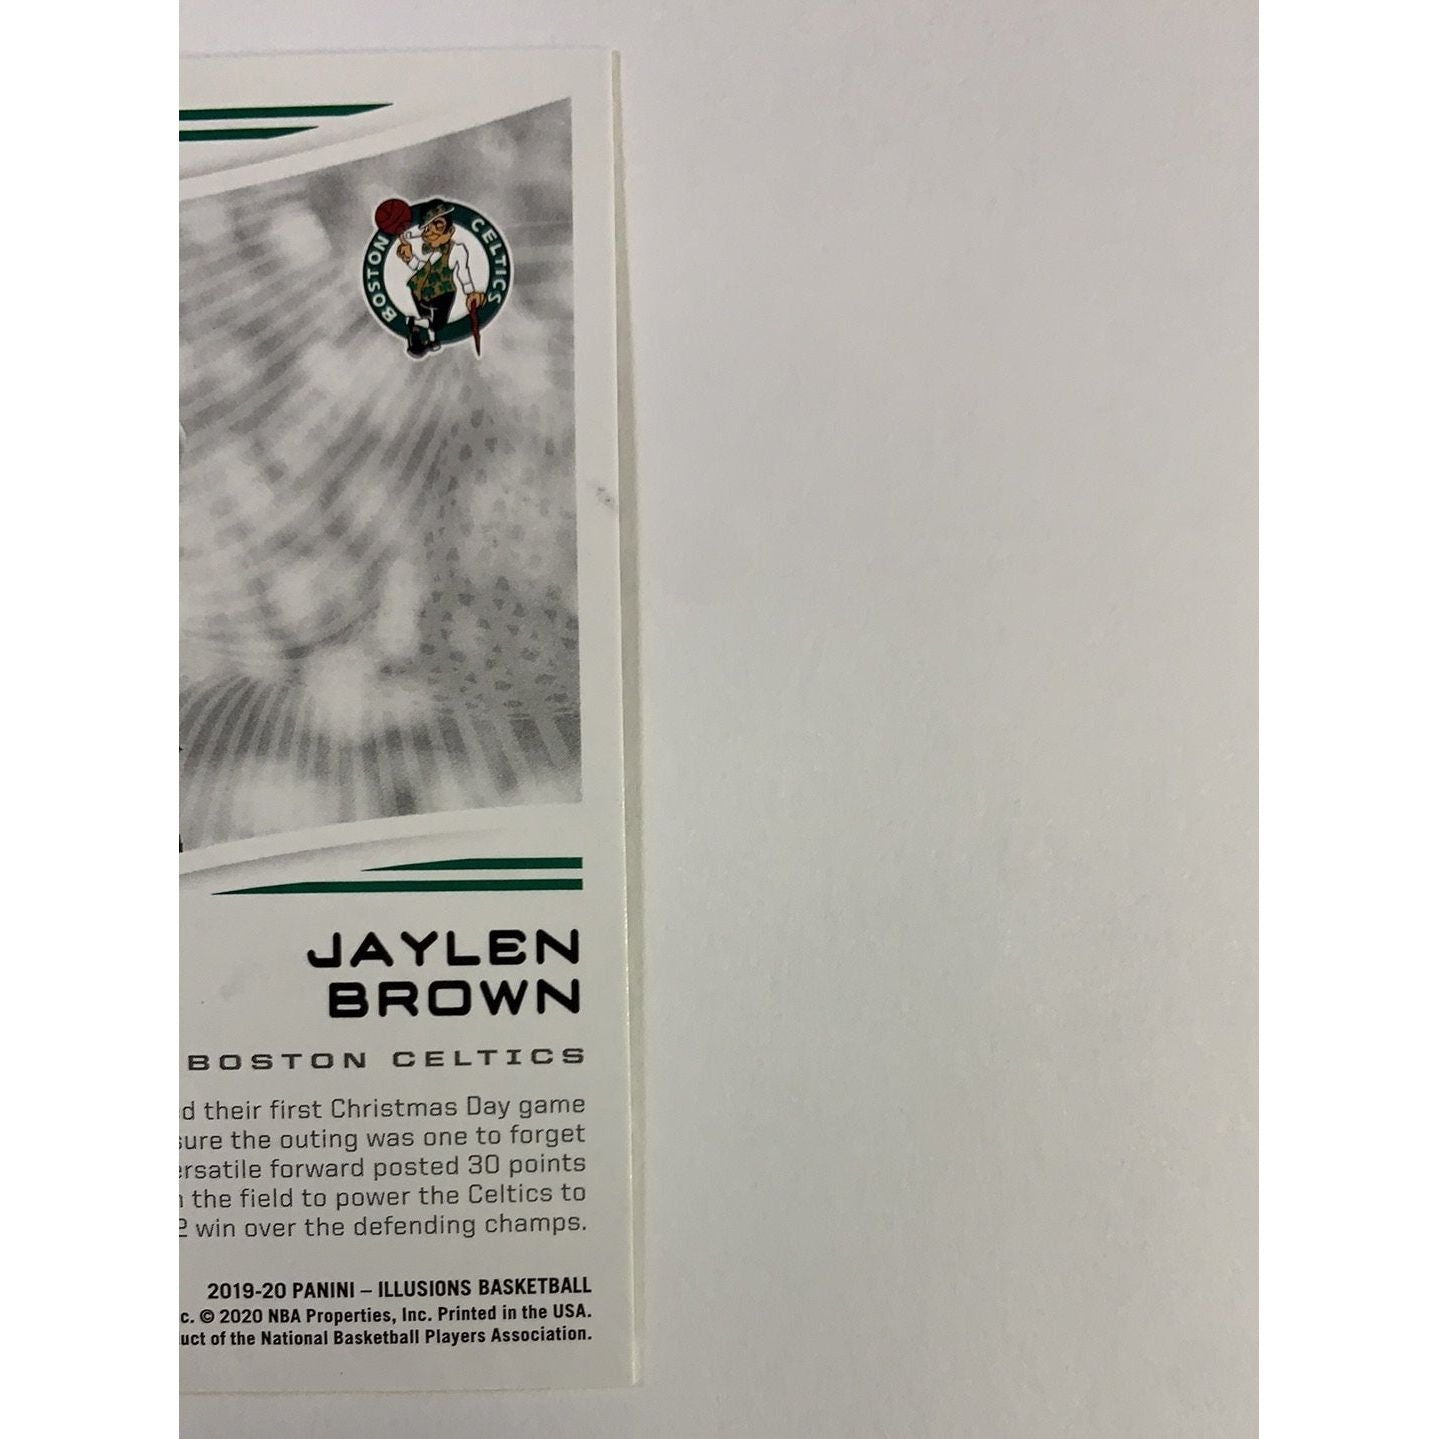  2019-20 Illusions Season Highlights Jaylen Brown  Local Legends Cards & Collectibles